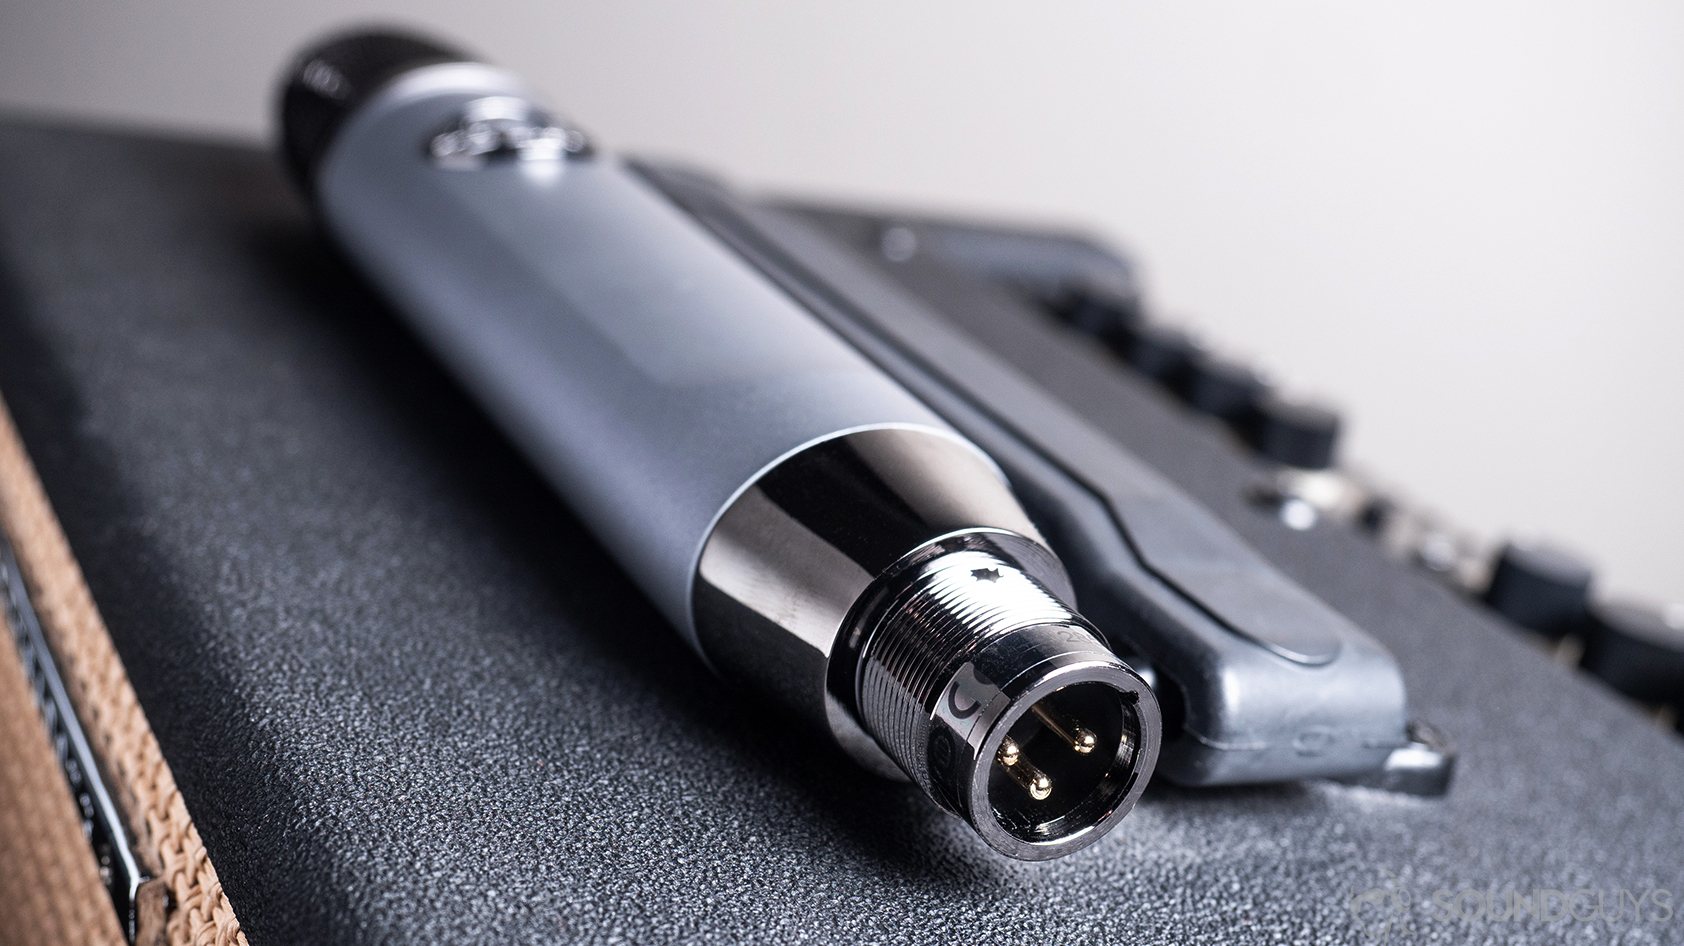 Blue Ember: The XLR input of the microphone, which is laying on a guitar amp.